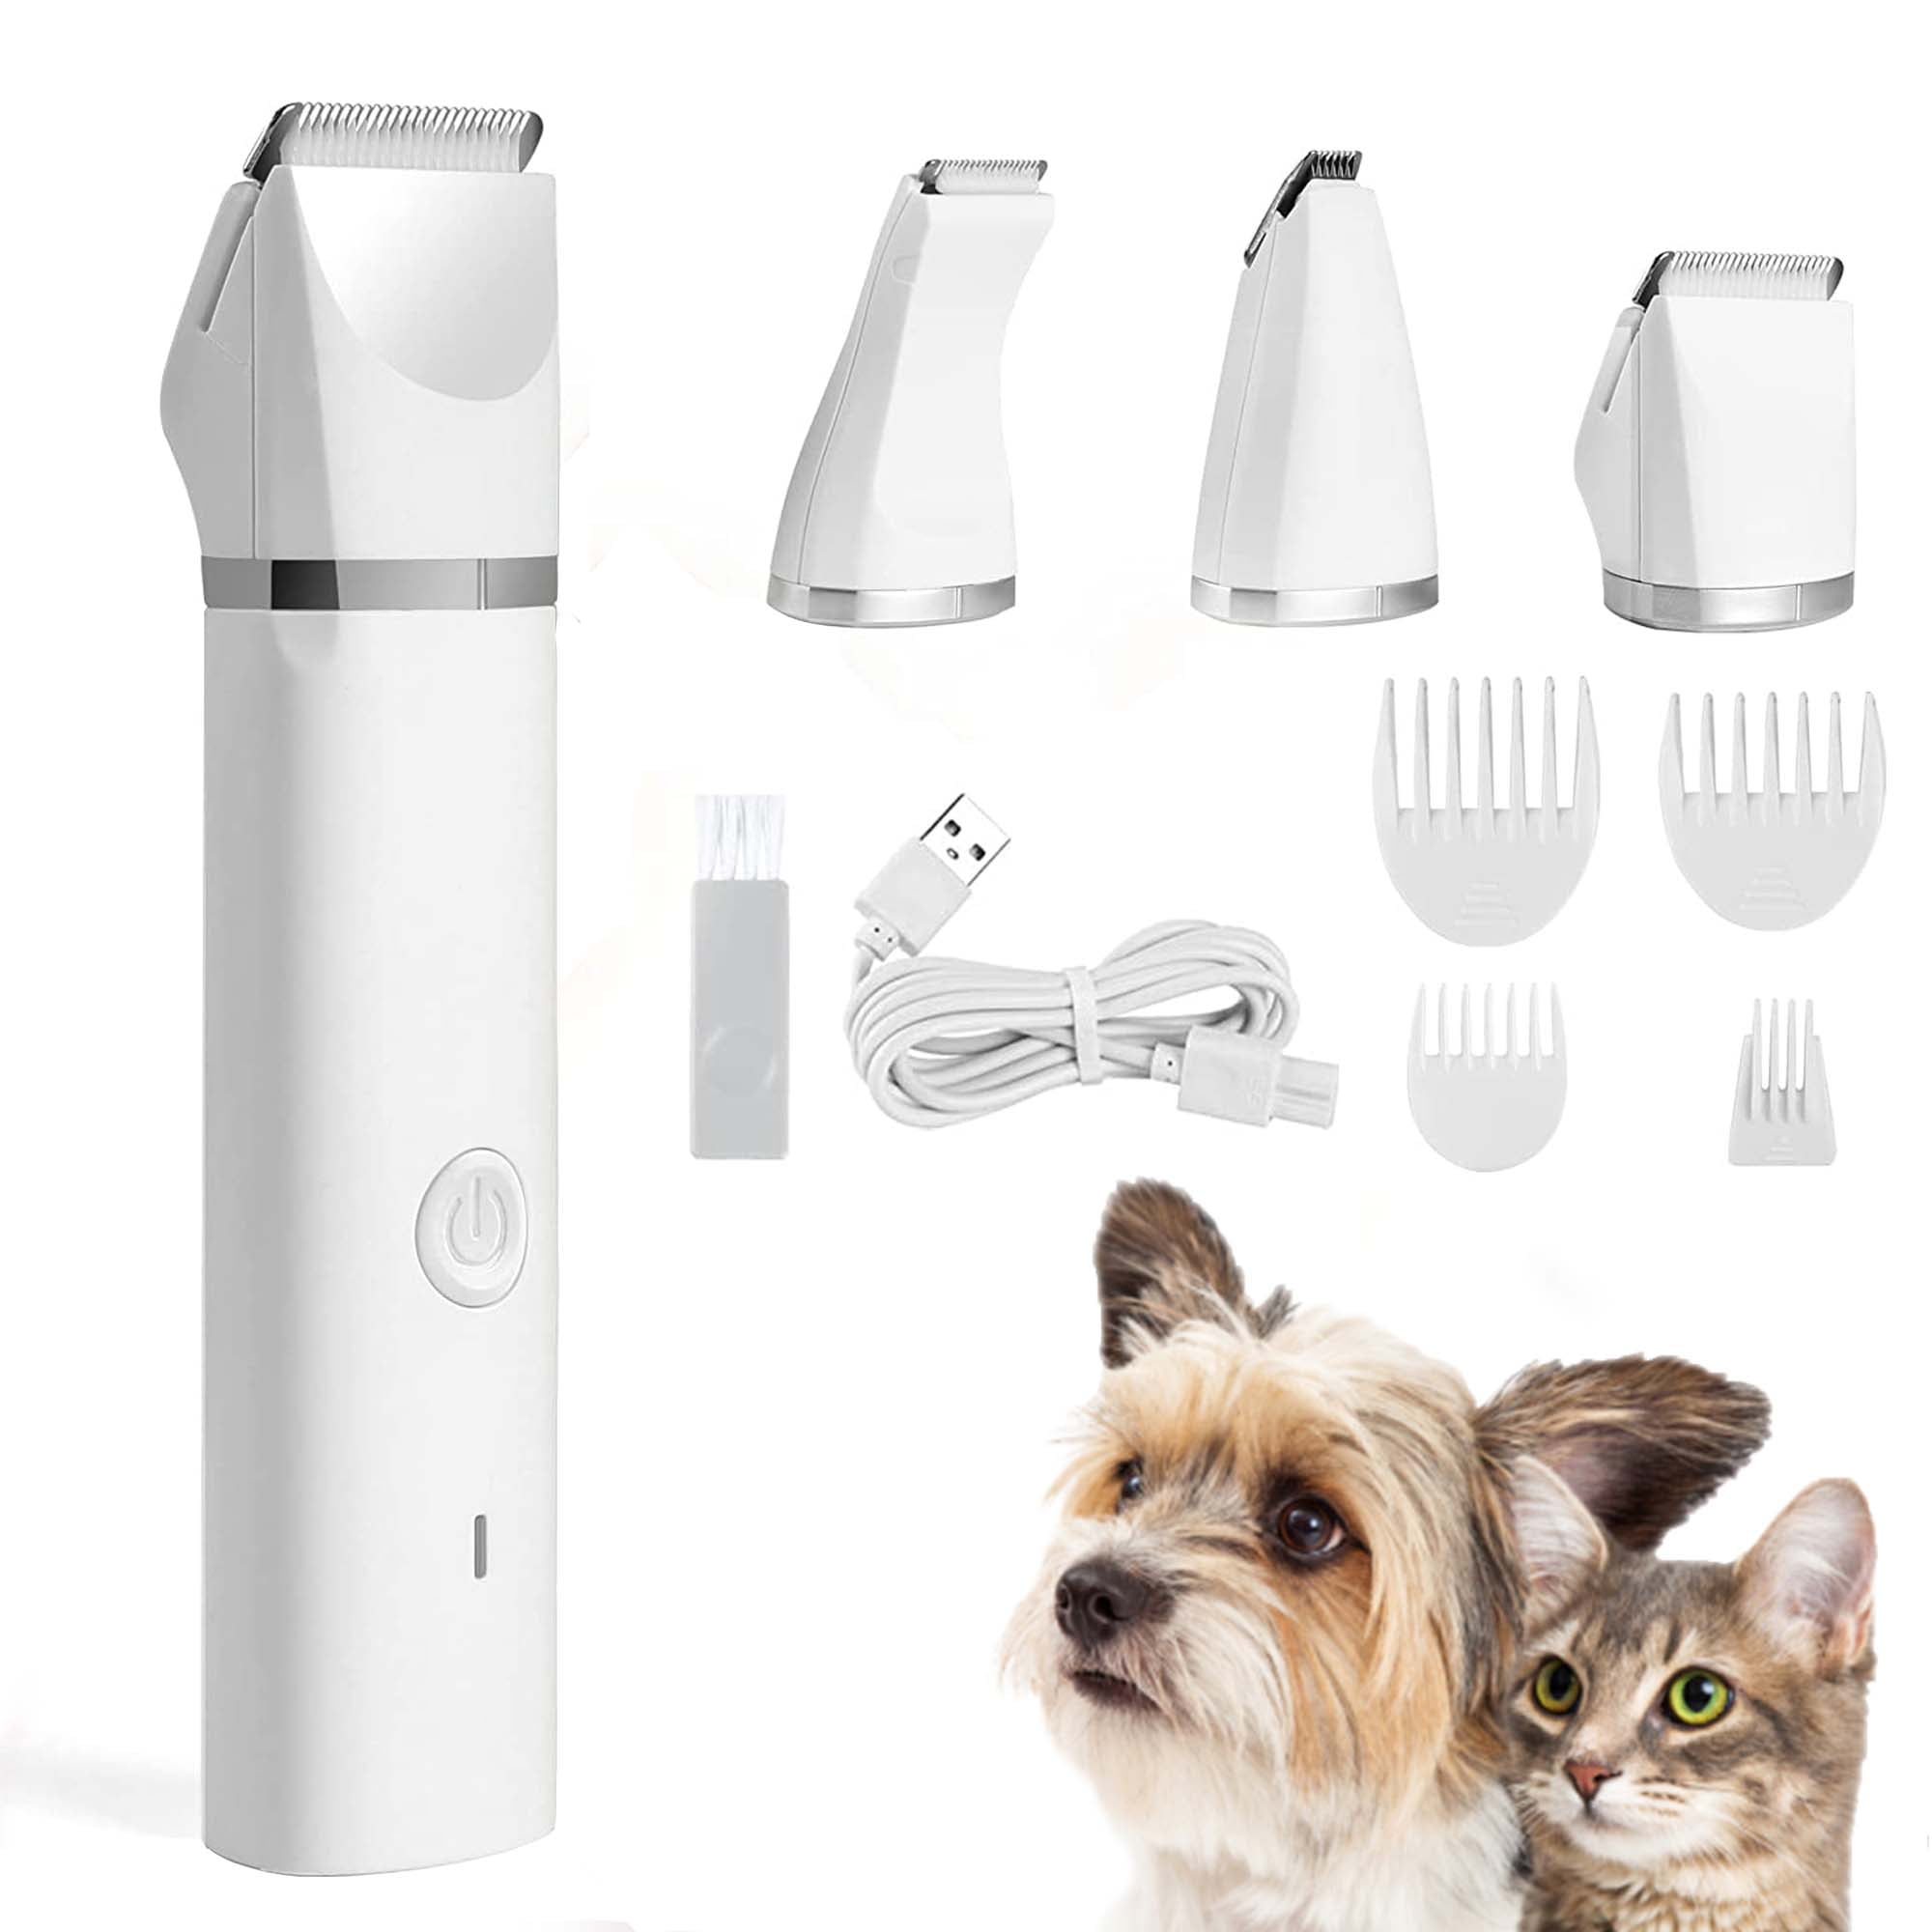 Mewoofun Dog Shaver Grooming Kit Electric Hair Clipper with 4 Blades ...